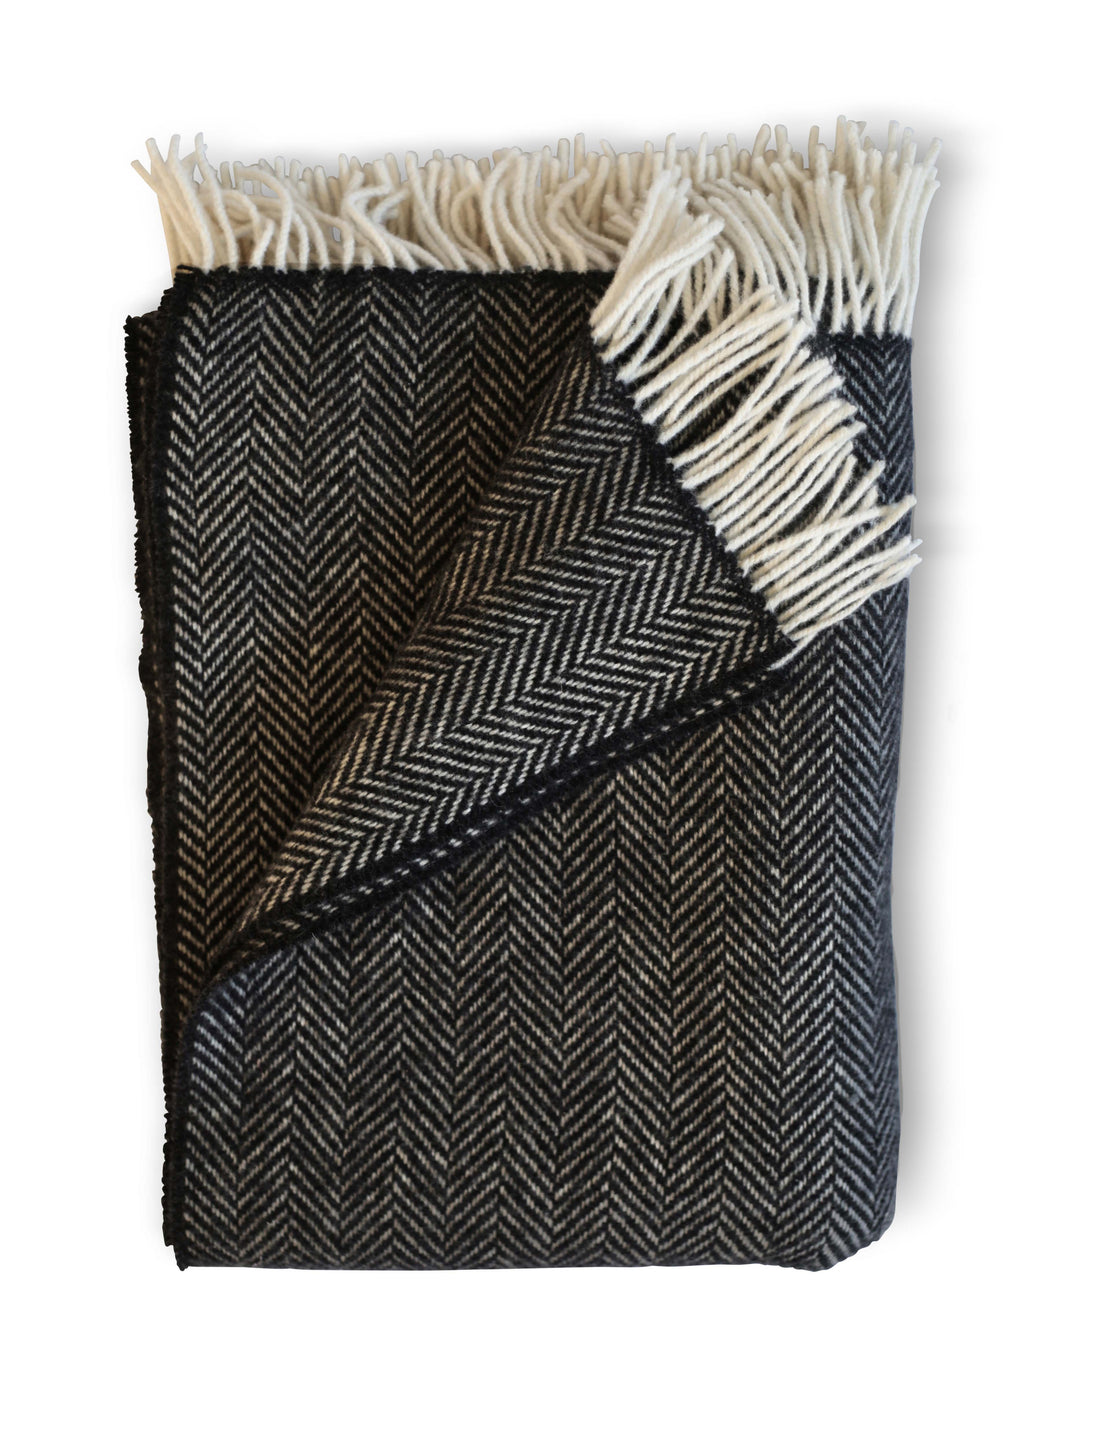 Folded Herringbone throw in Thundercloud, a dark grey colored throw with cream tassel detail. Timeless herringbone design. Super soft luster of cashmere. cozy comfort of merino wool. A chunky and cuddly classic. 95% Merino Lambswool and 5% Cashmere. Woven in Ireland.